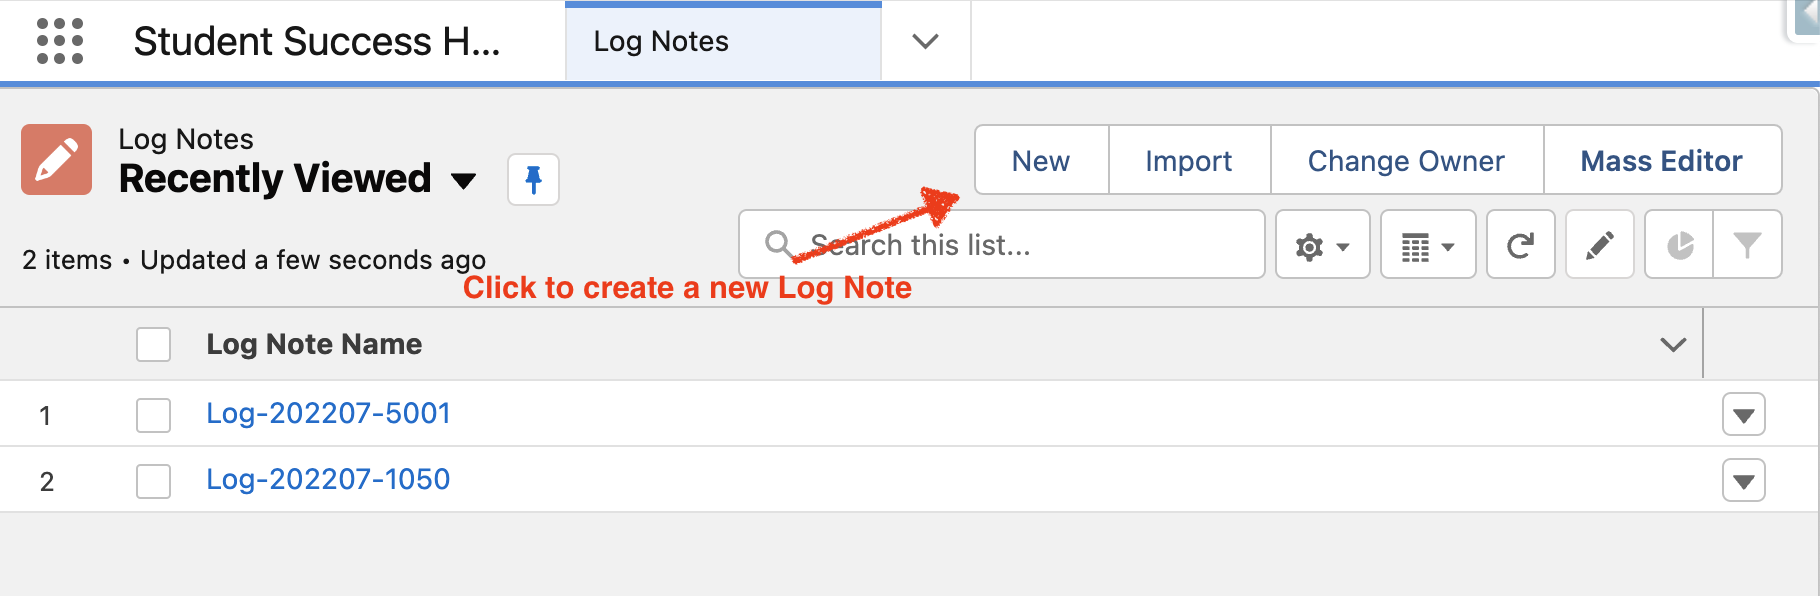 New_Log_Note_-_List_View.png